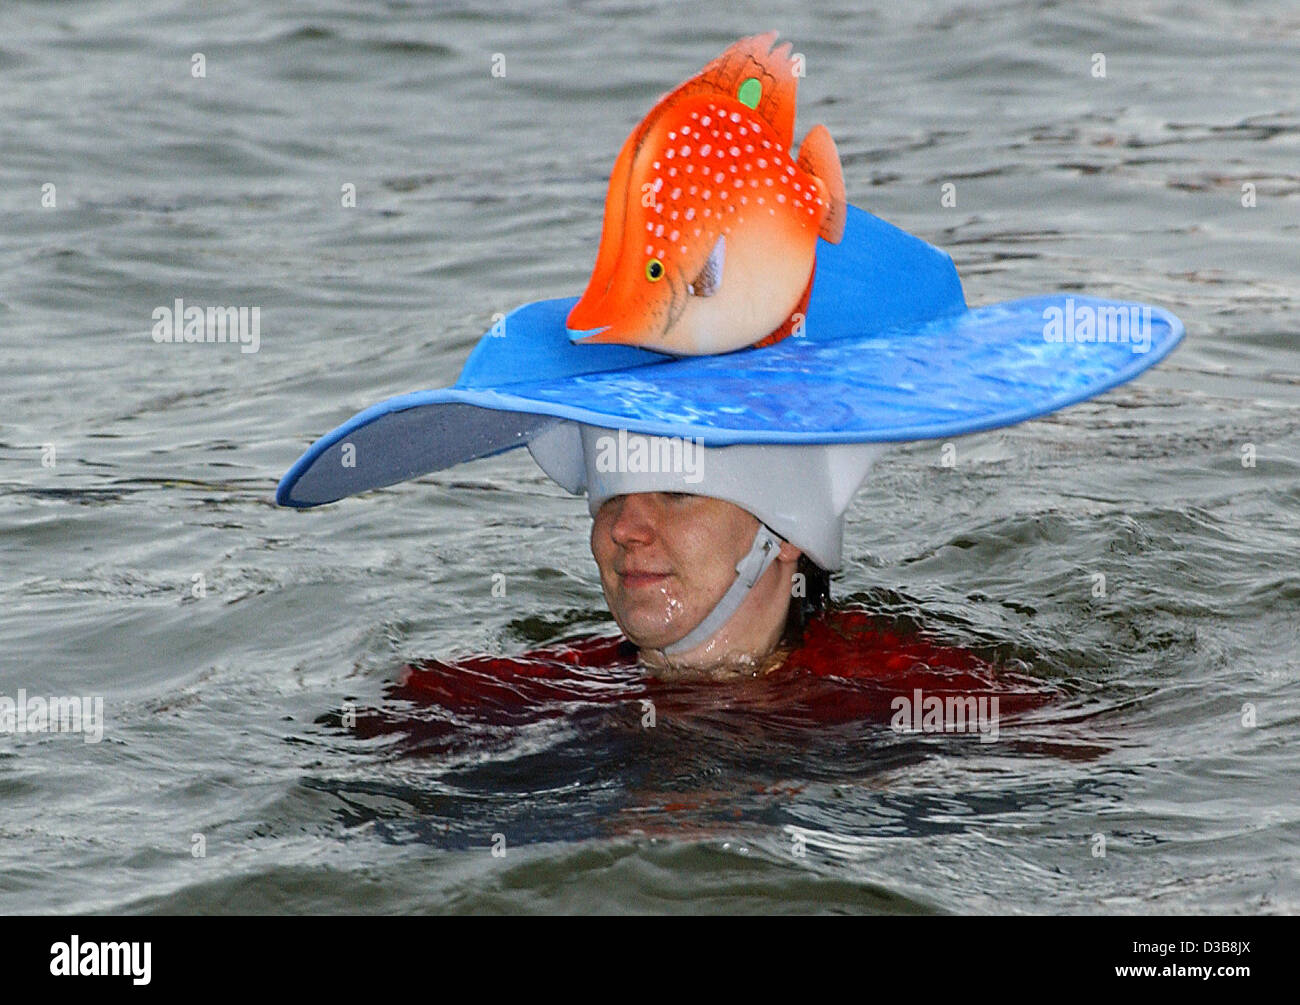 Fish Wearing Hat High Resolution Stock Photography and Images - Alamy